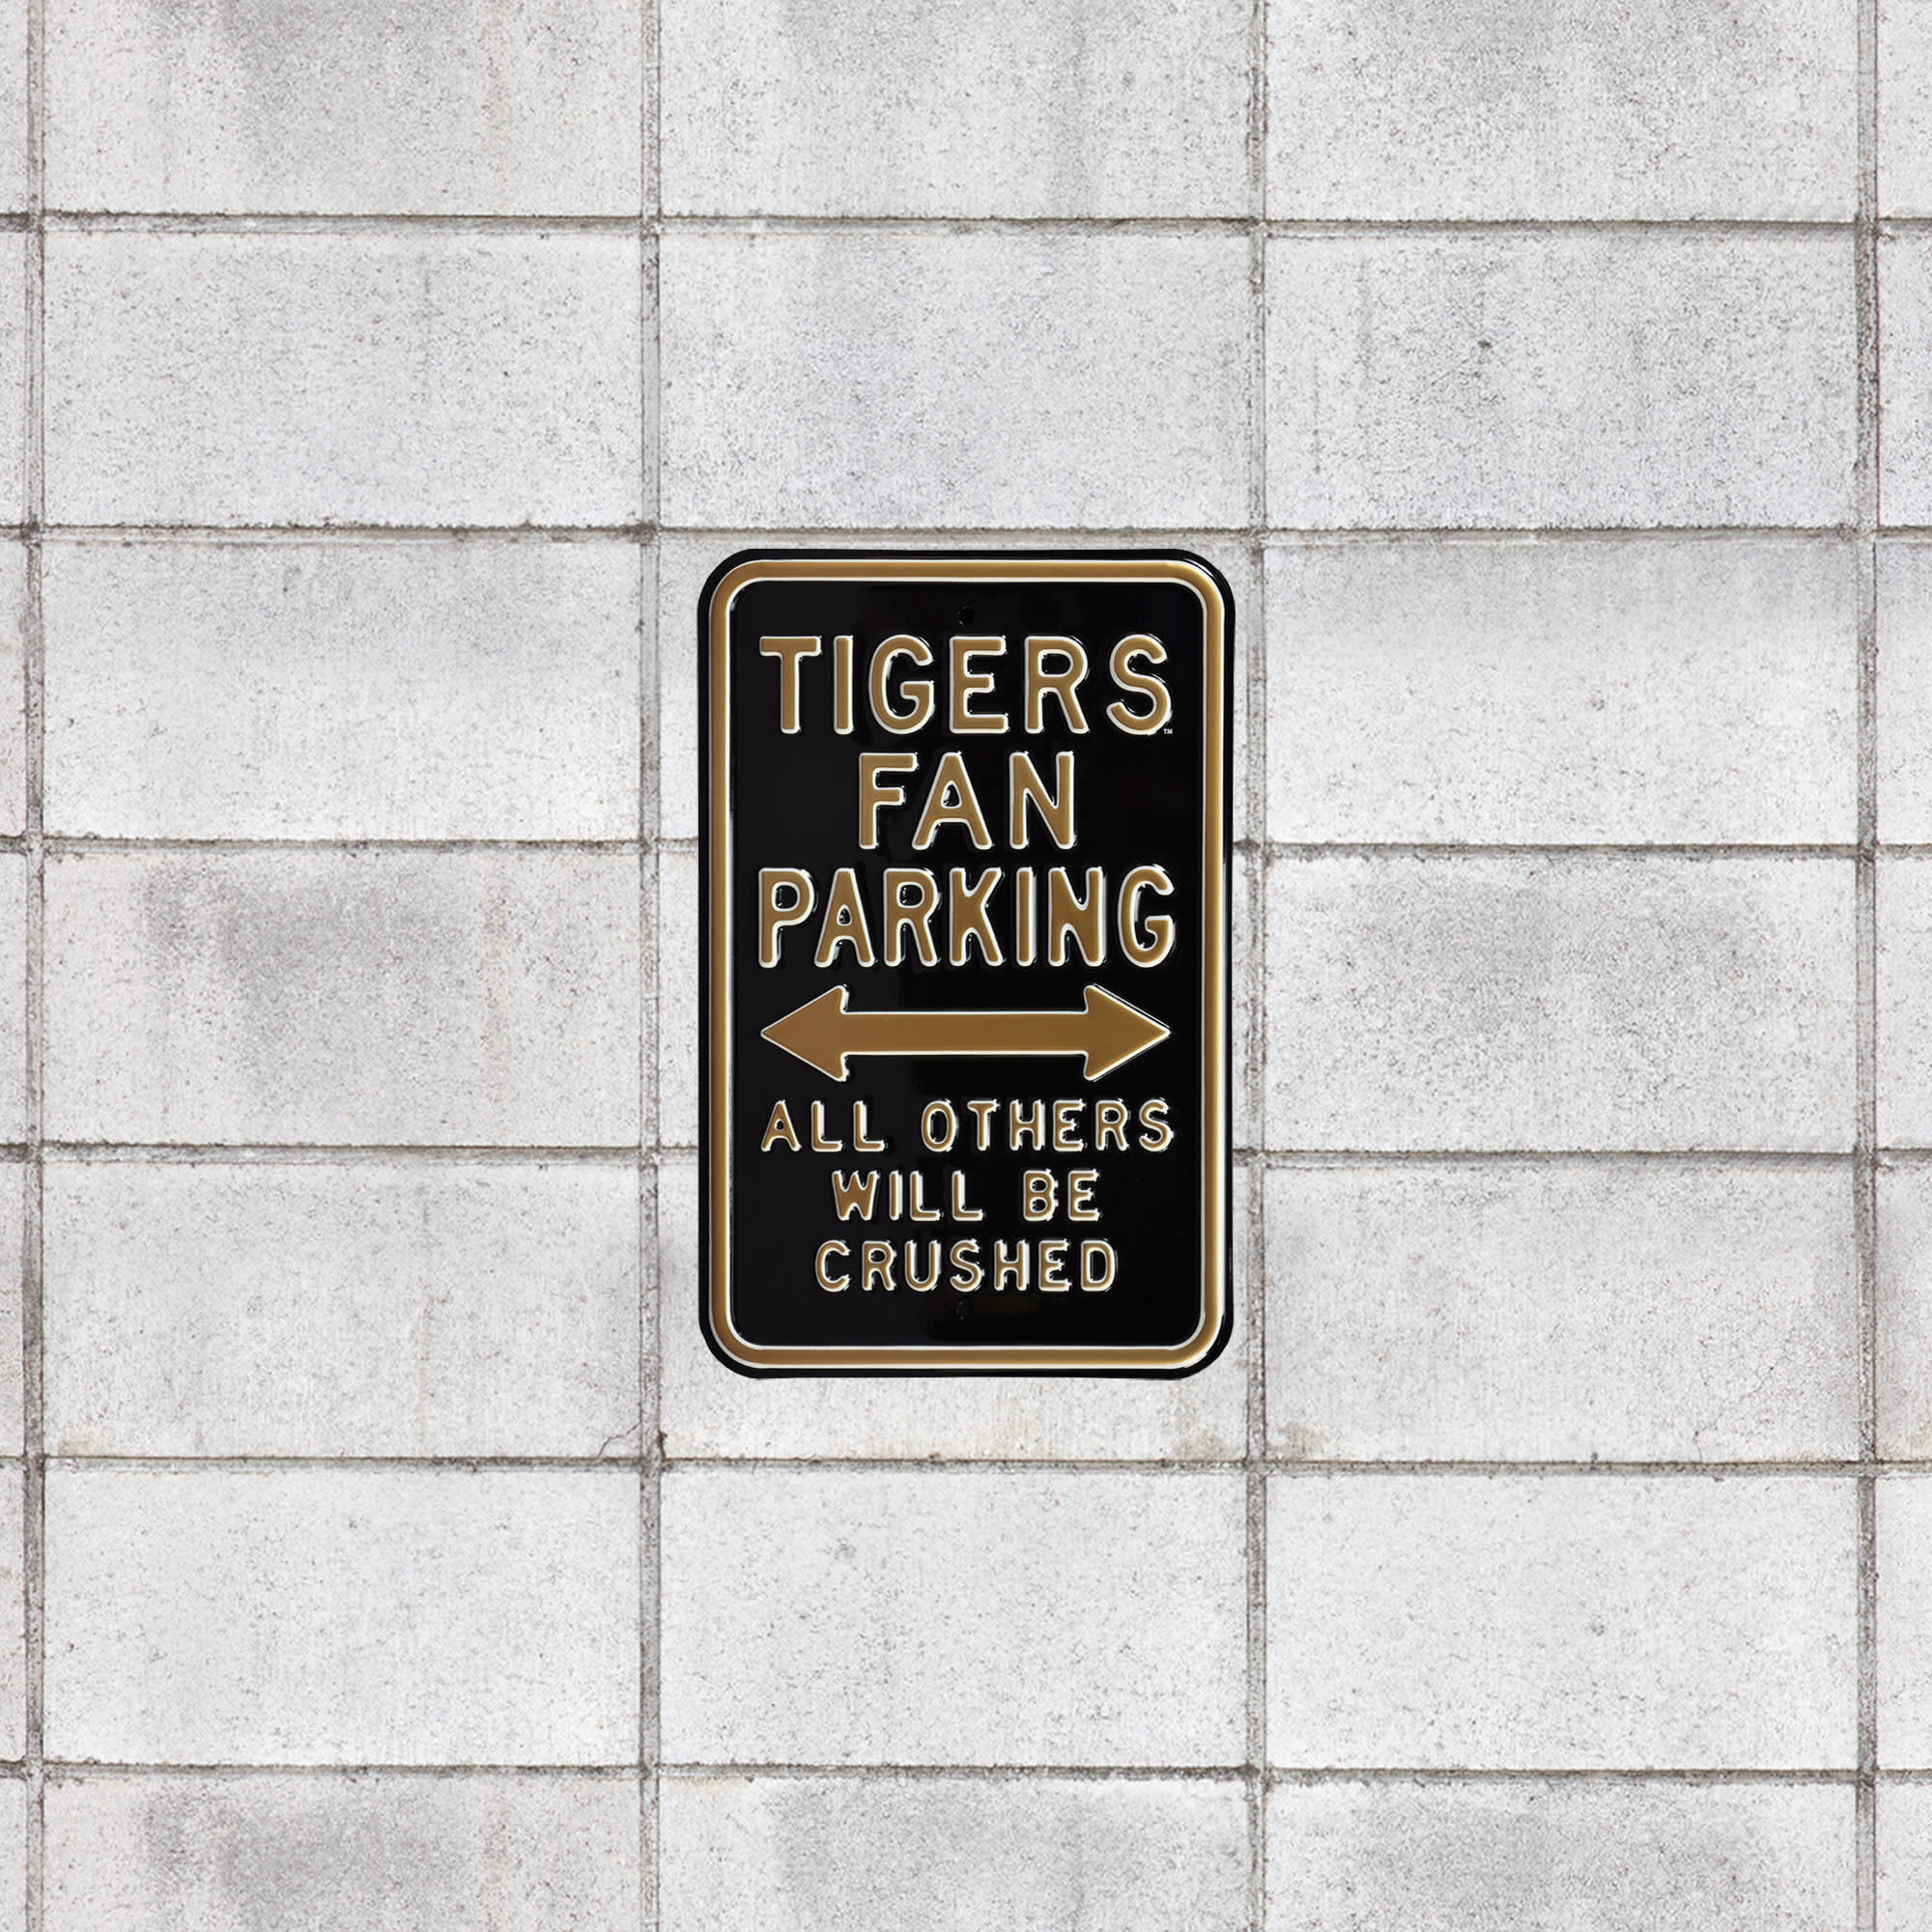 Missouri Tigers: Crushed Parking - Officially Licensed Metal Street Sign 18.0"W x 12.0"H by Fathead | 100% Steel